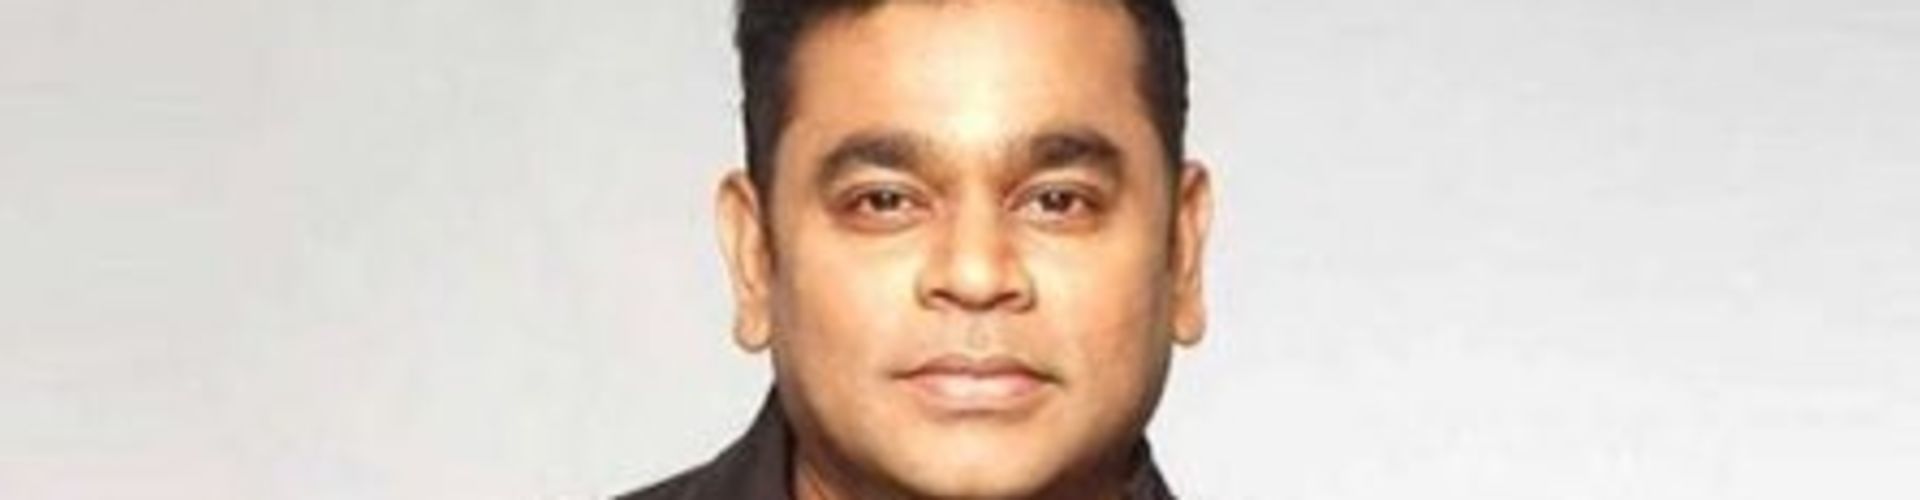 ​Social Media Offers Great Freedom, but we need to be careful – AR Rahman